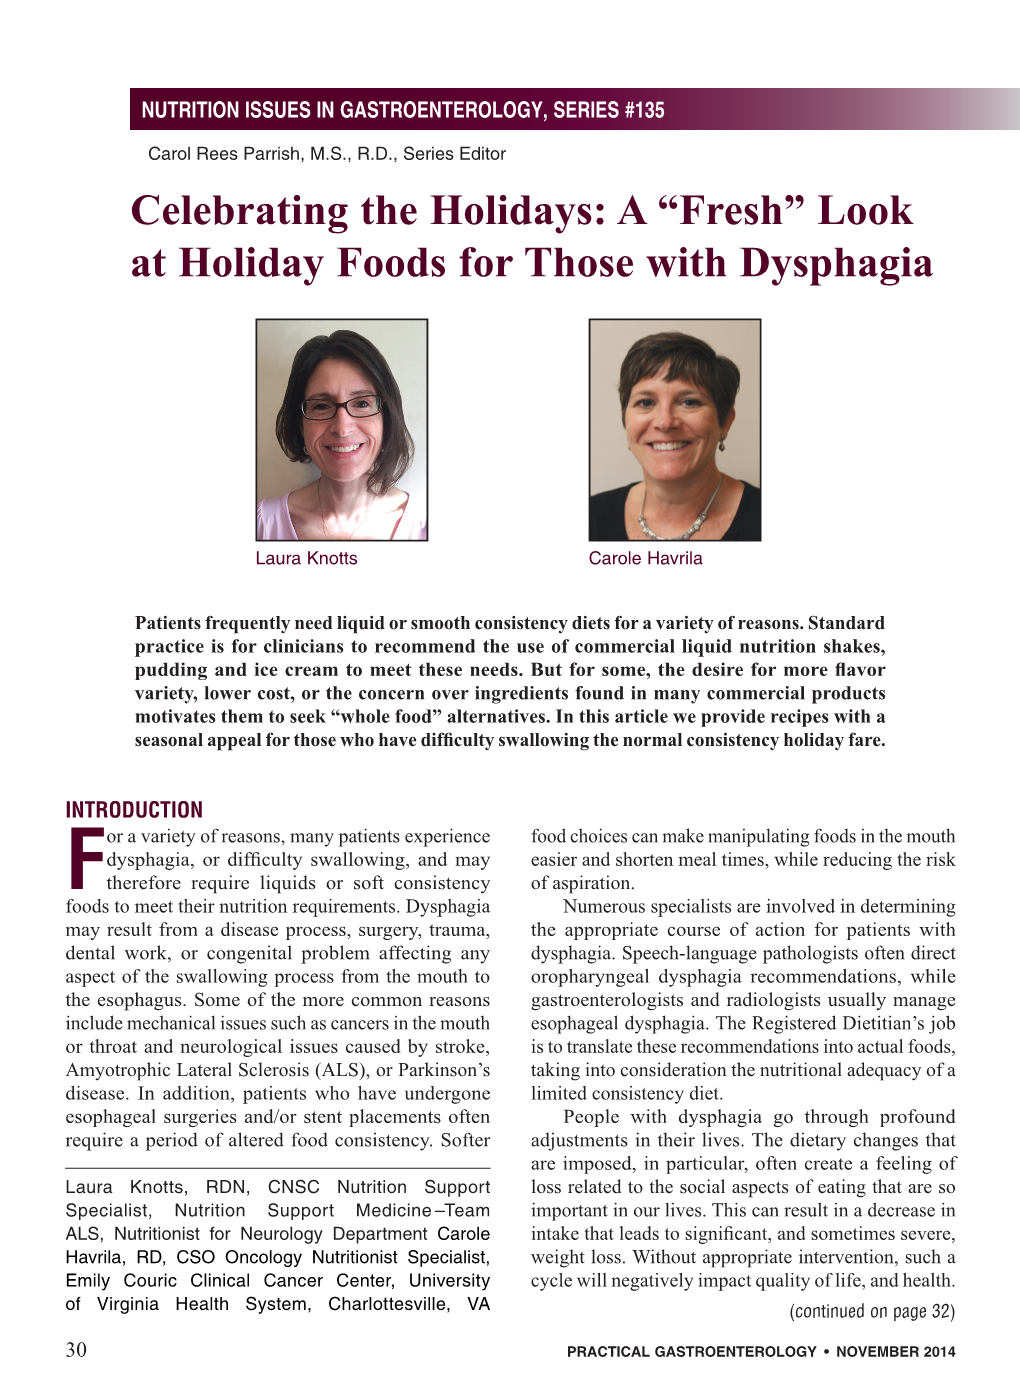 A “Fresh” Look at Holiday Foods for Those with Dysphagia